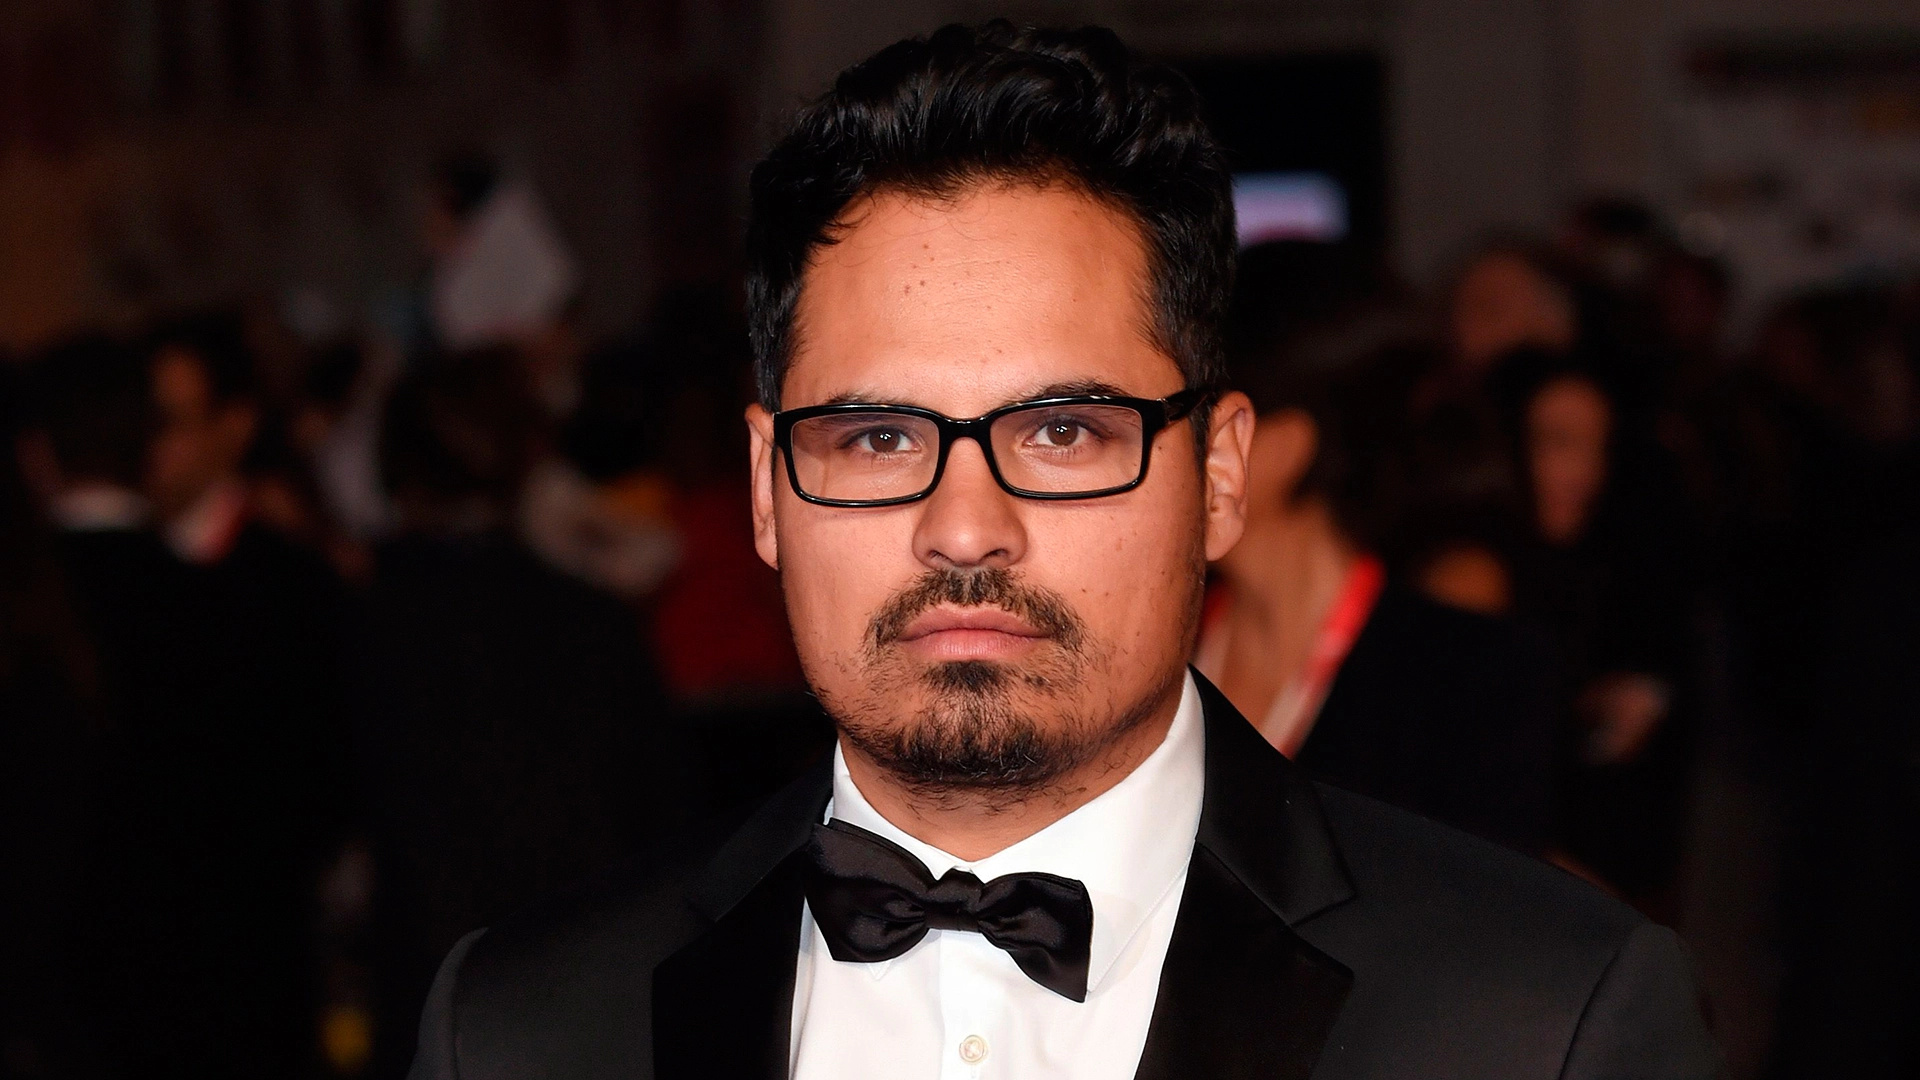 Michael Pena, Sony Pictures withdrawal, Horror thriller The Bringing, Variety article, 1920x1080 Full HD Desktop